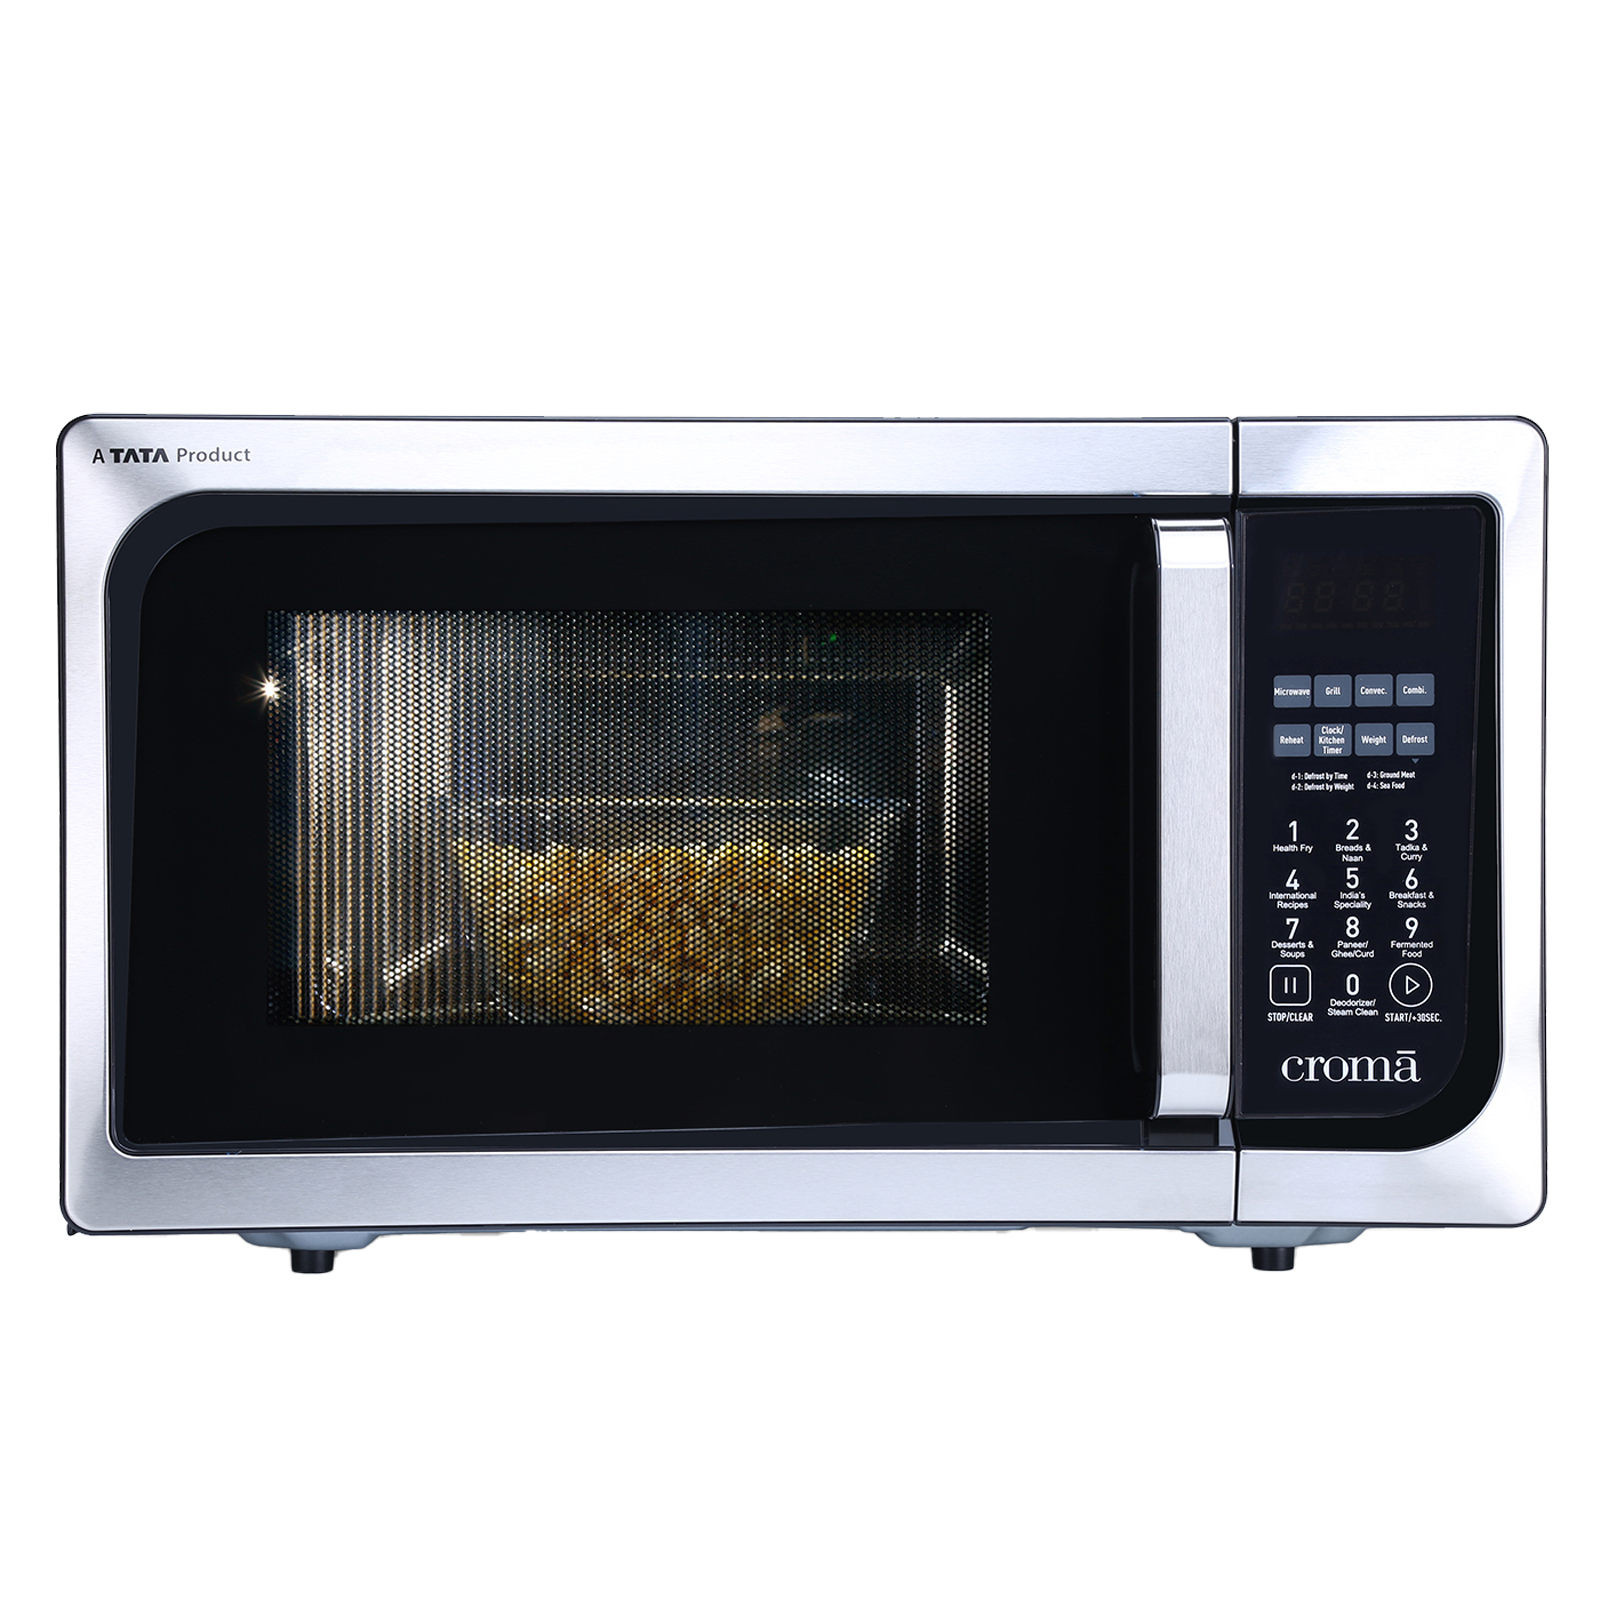 Croma 23 Litres Convection Microwave Oven (Child Lock, CRAM0151, Black)_1